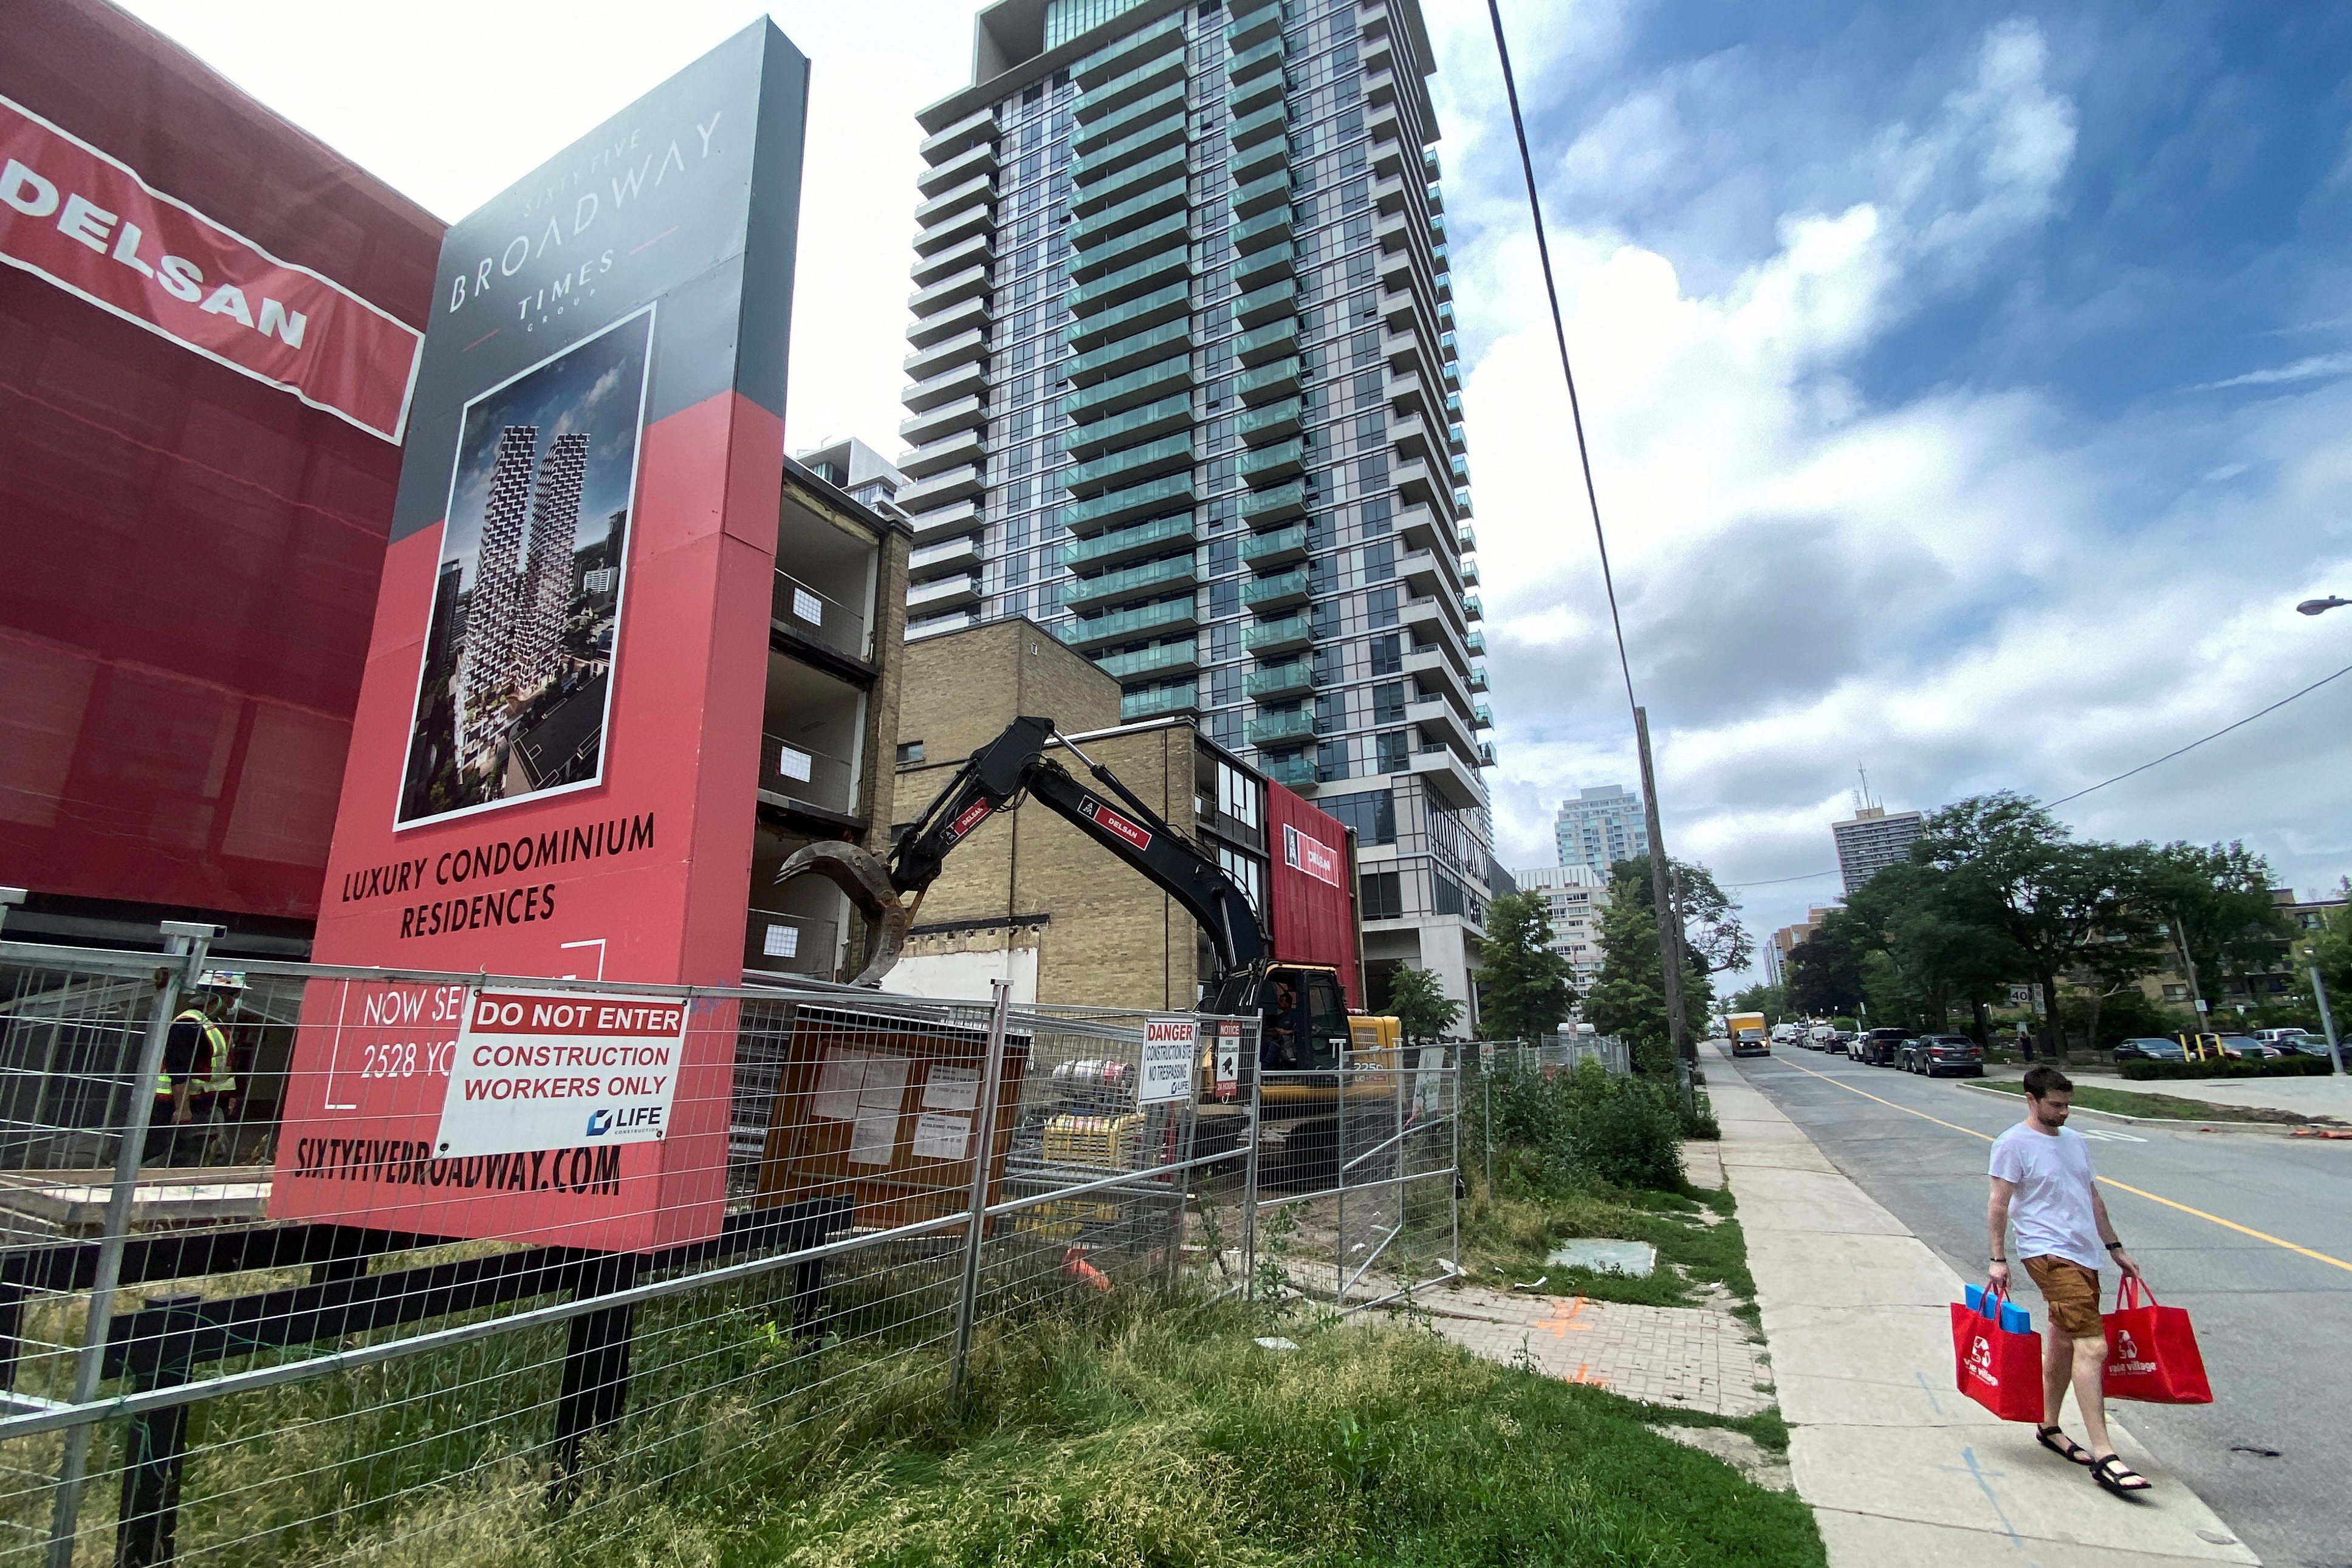 Apartment blocks of affordable housing are demolished to make way for luxury condominiums in midtown Toronto